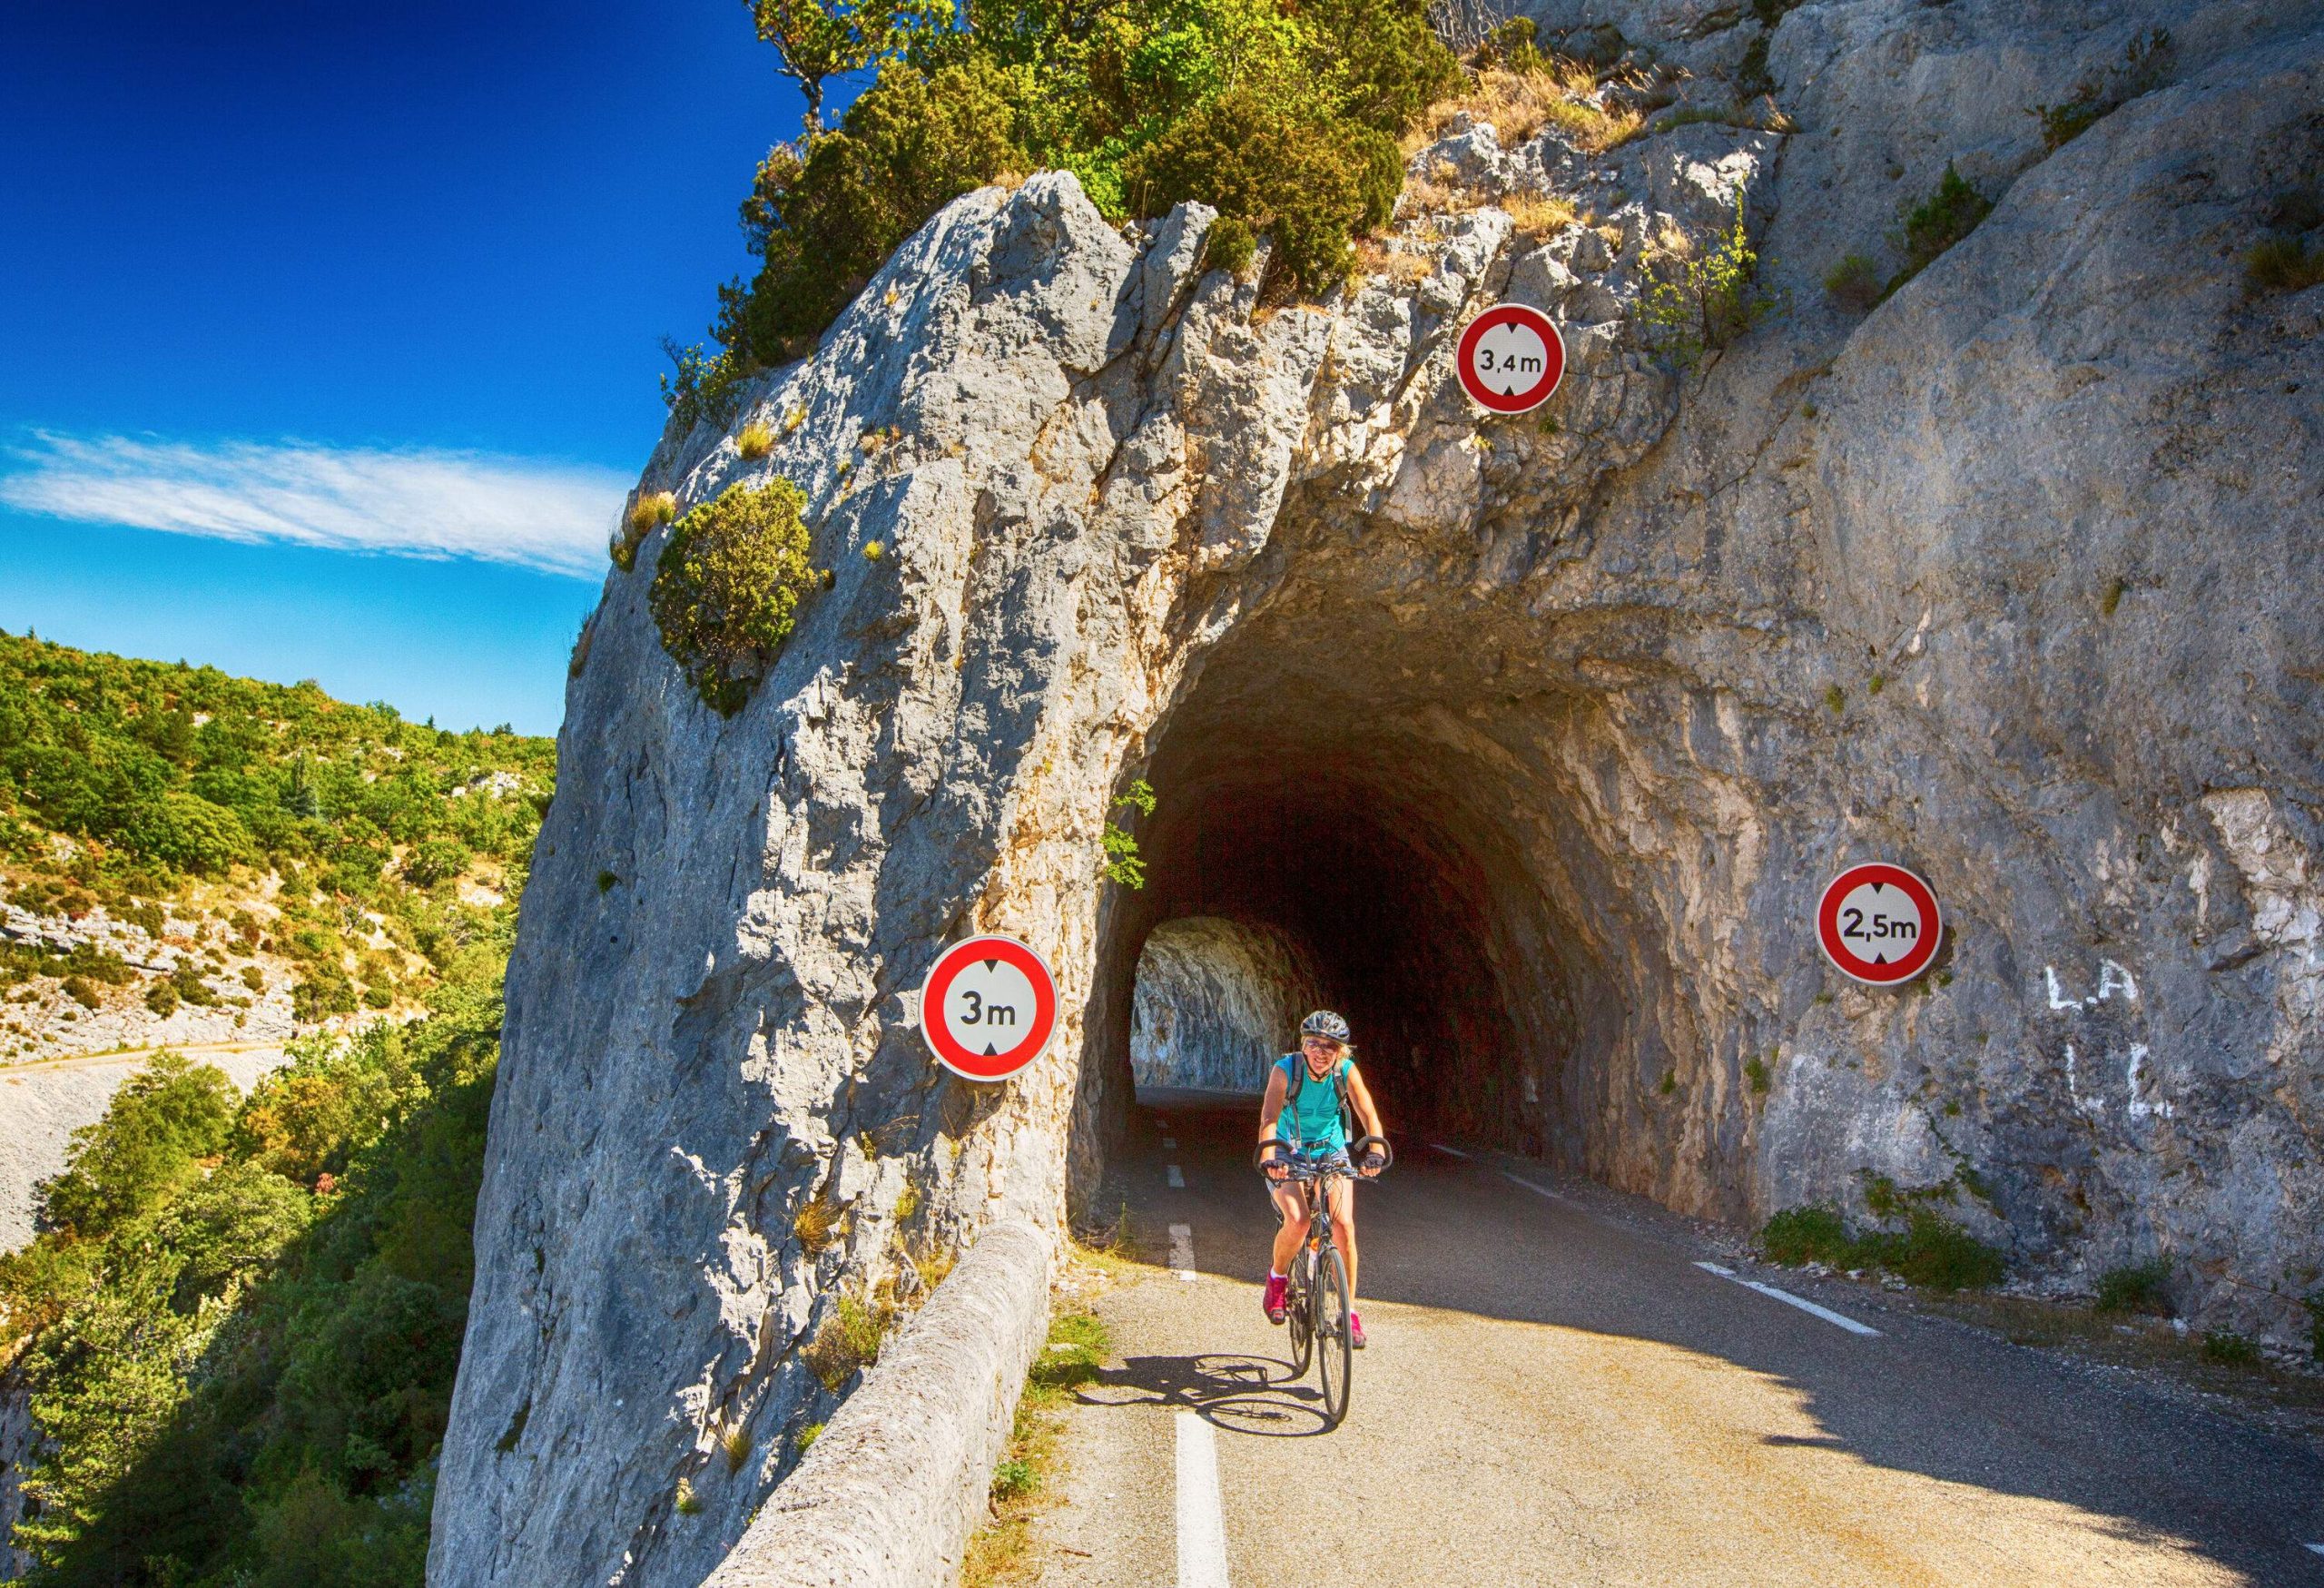 A woman biking pass through a cave road on the mountainside.